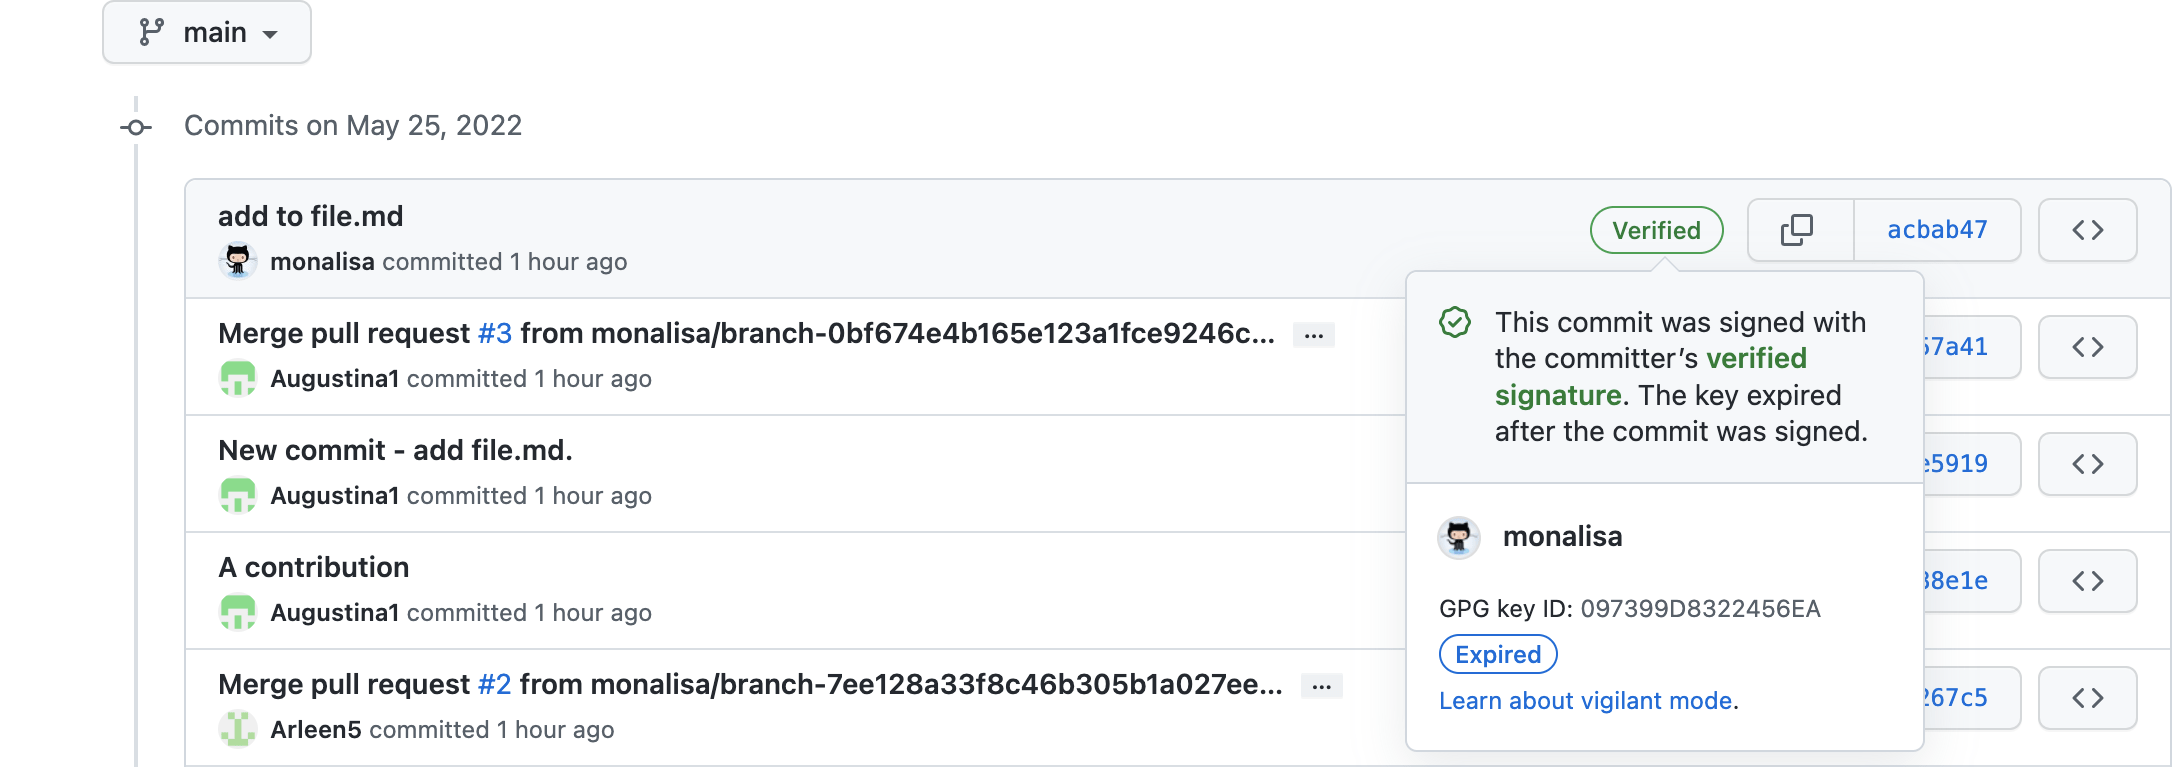 An image of GitHub showing a commit's signature as verified even though its public GPG key is expired